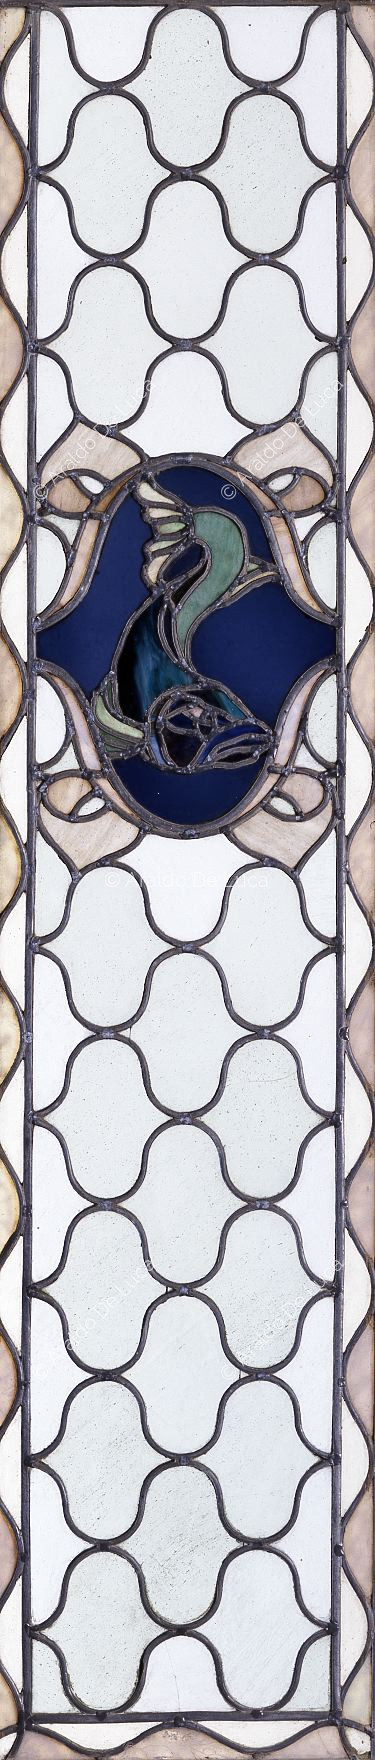 Stained glass with geometric motif and fish